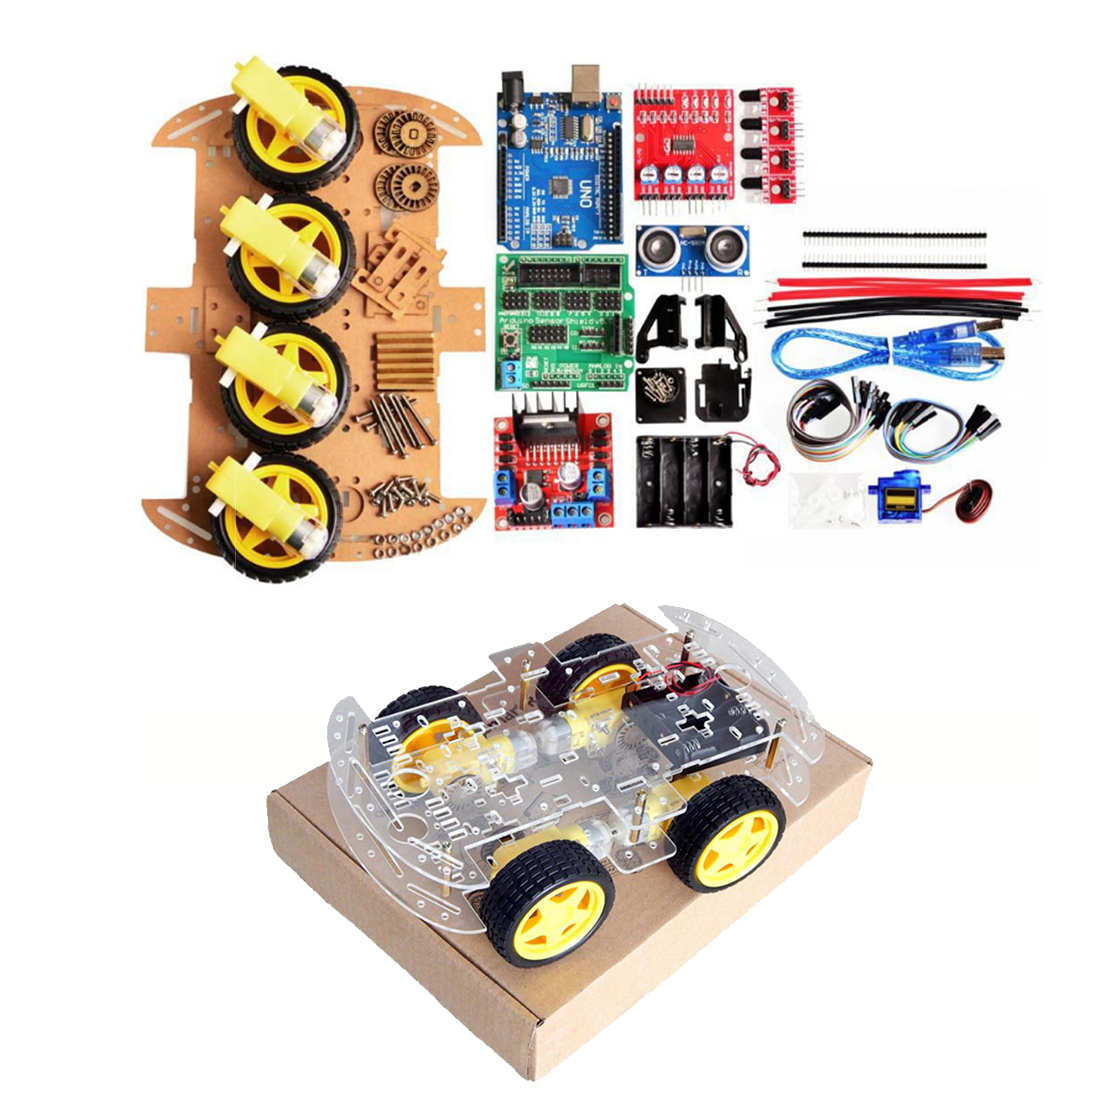 

4WD DIY Smart Chassis Car Kit For Arduino with UNO R3 + Ultrasonic Module+Motor drive board/3-6v TT Motor